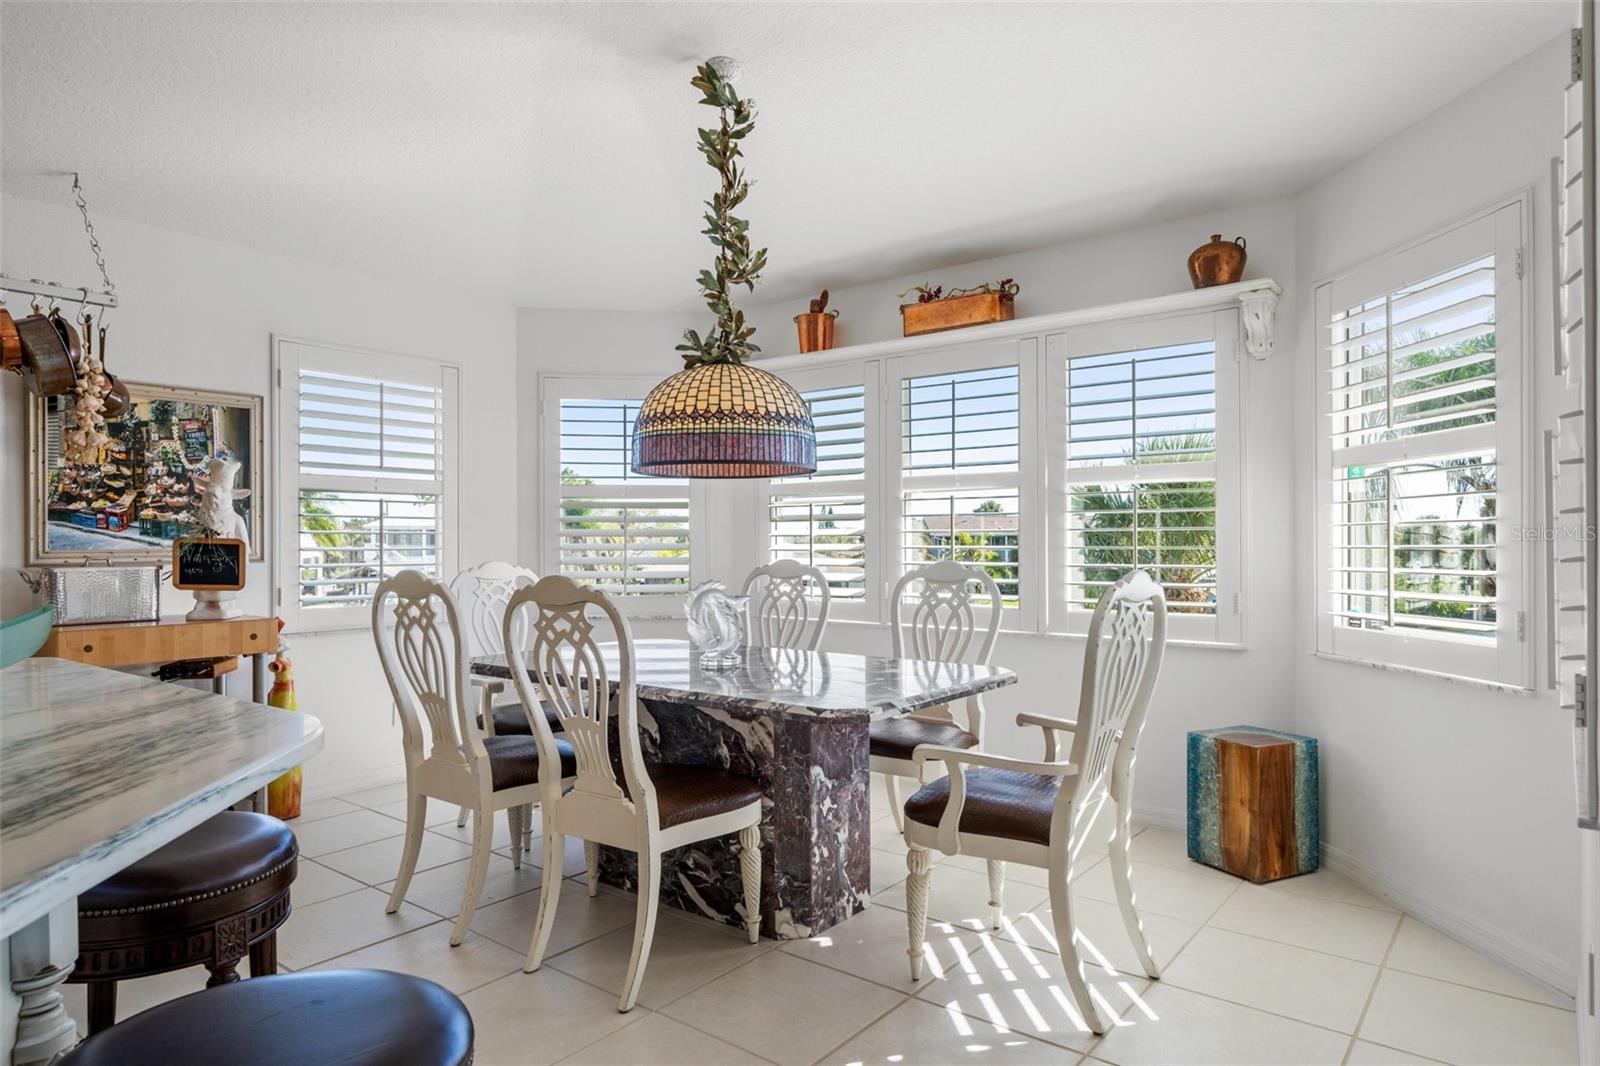 Dining Room with Plantation Shutters in the Bay Window